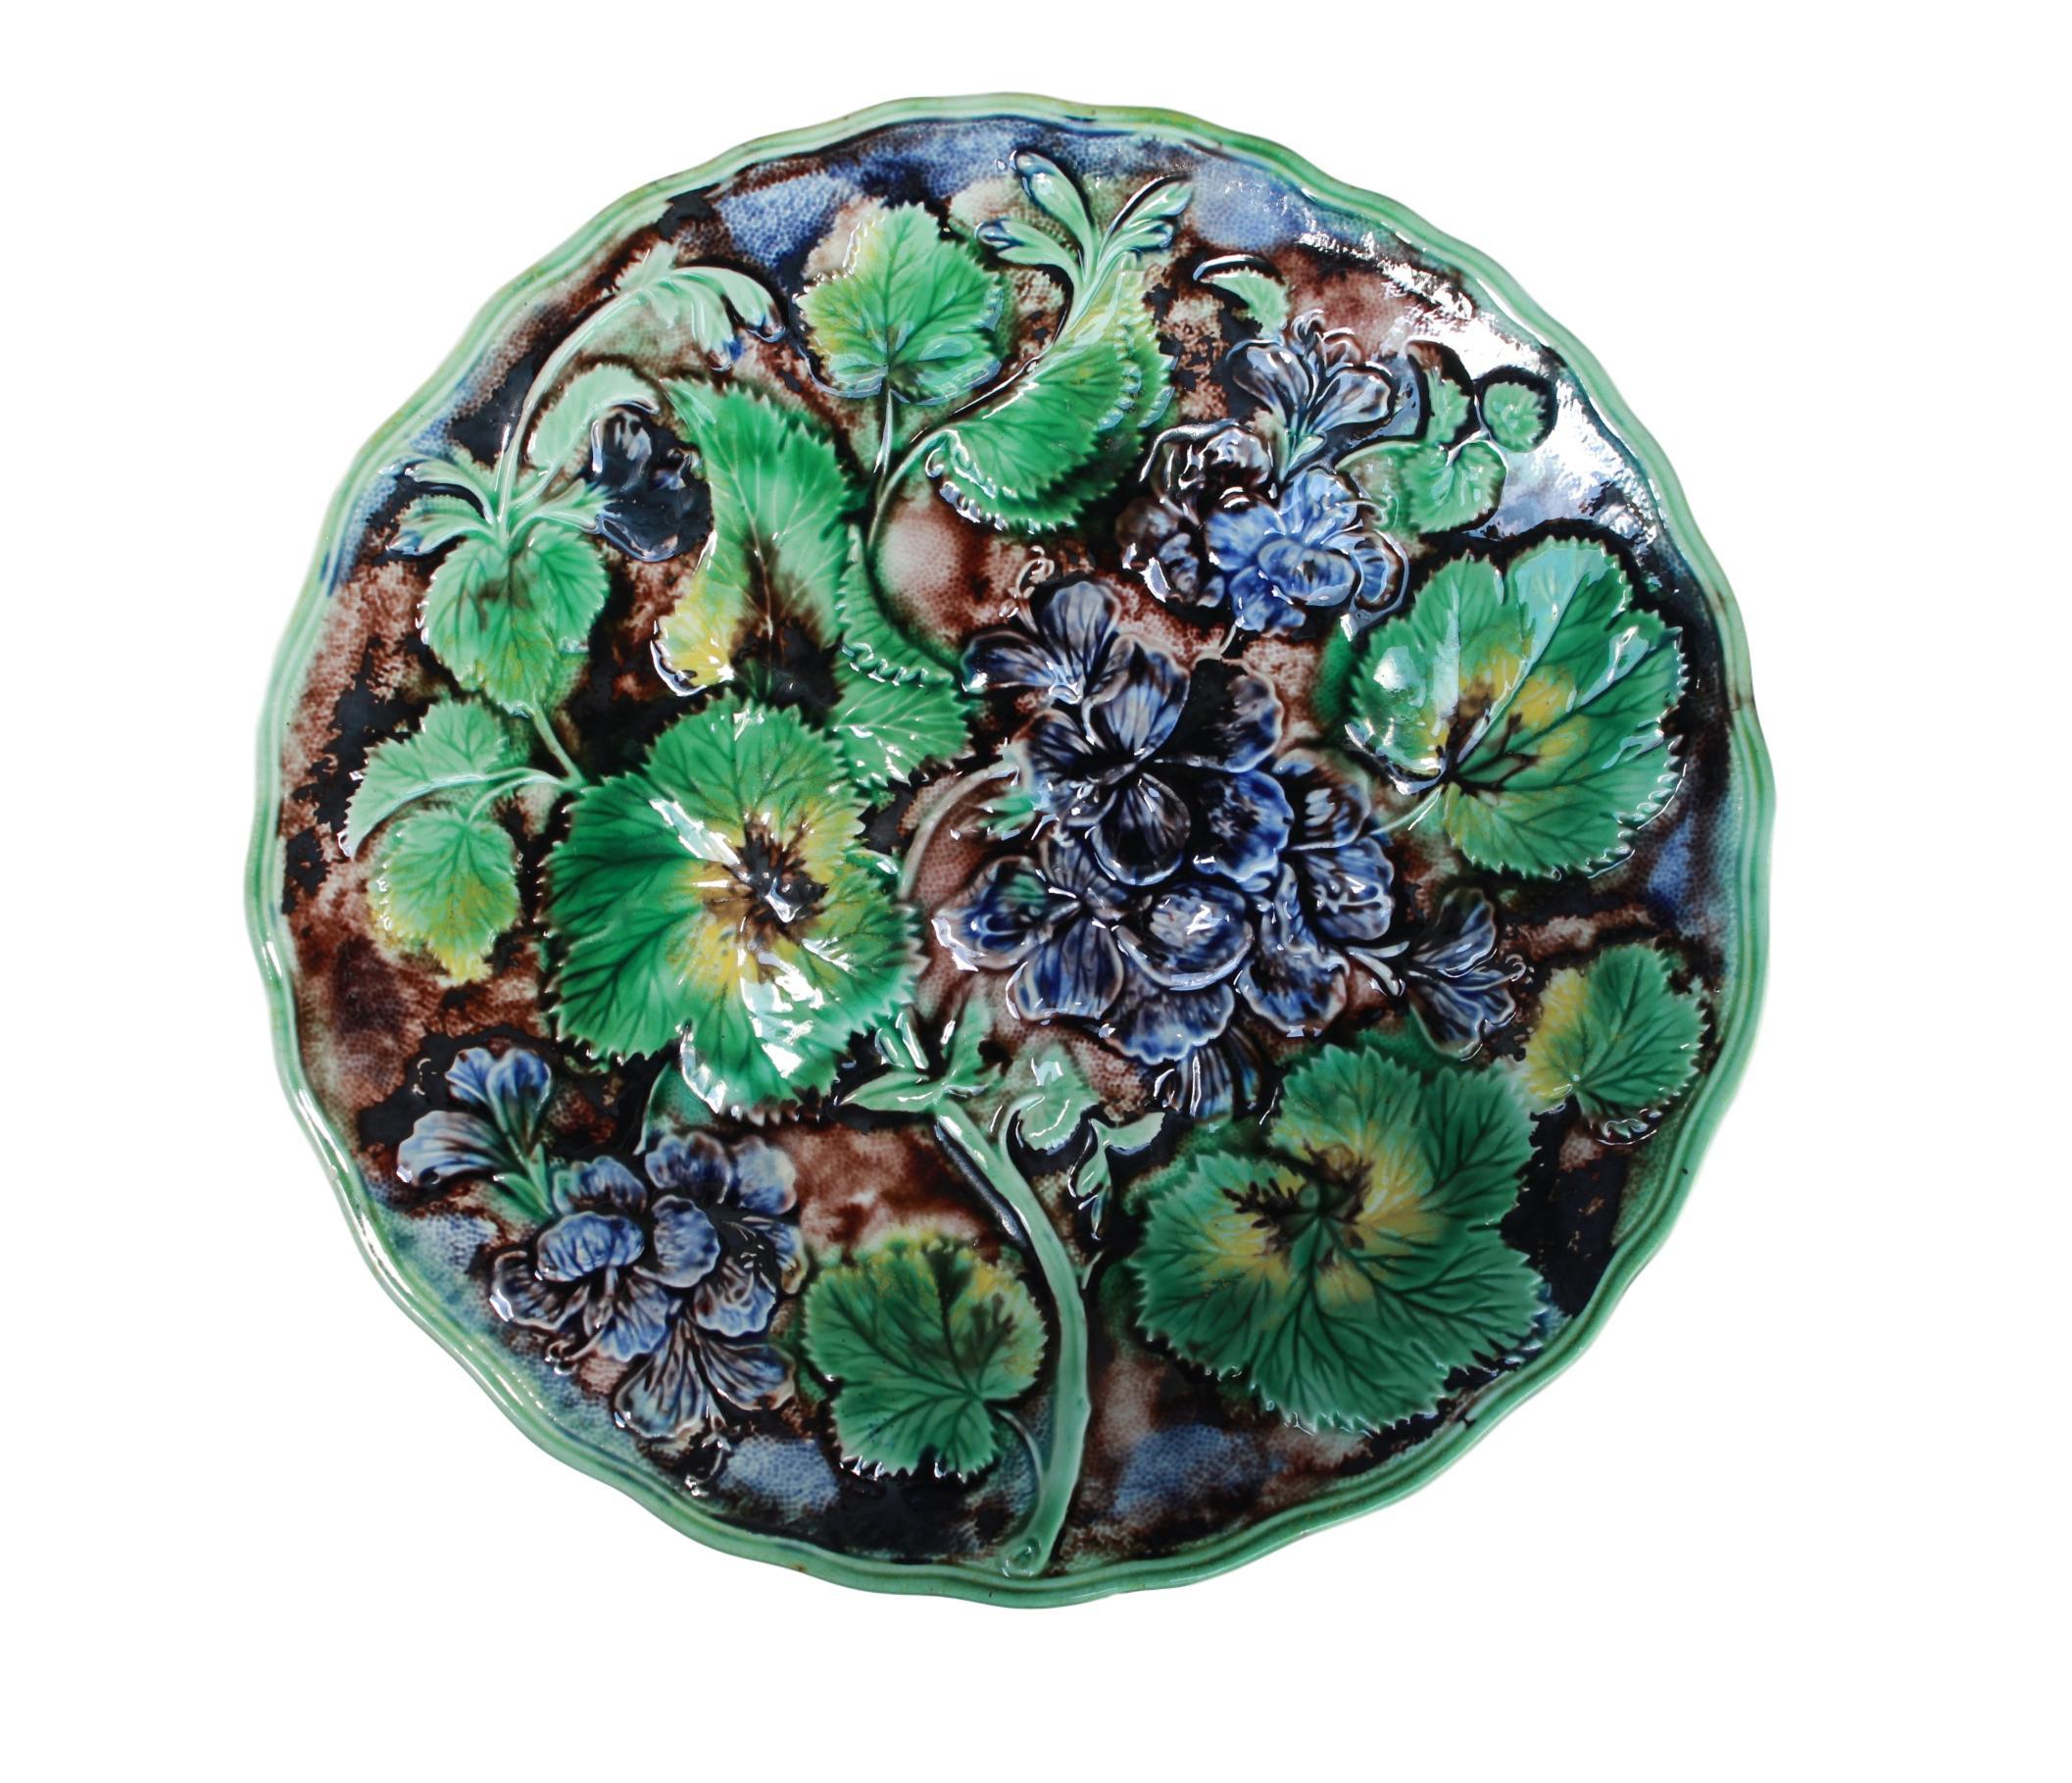 Samuel Alcock & Co. Majolica purple glazed geraniums plate, English, circa 1860, molded with purple glazed geranium blossoms, stems and leaves glazed in green, yellow and brown, reserved on a faux bois ground within a shaped green glazed